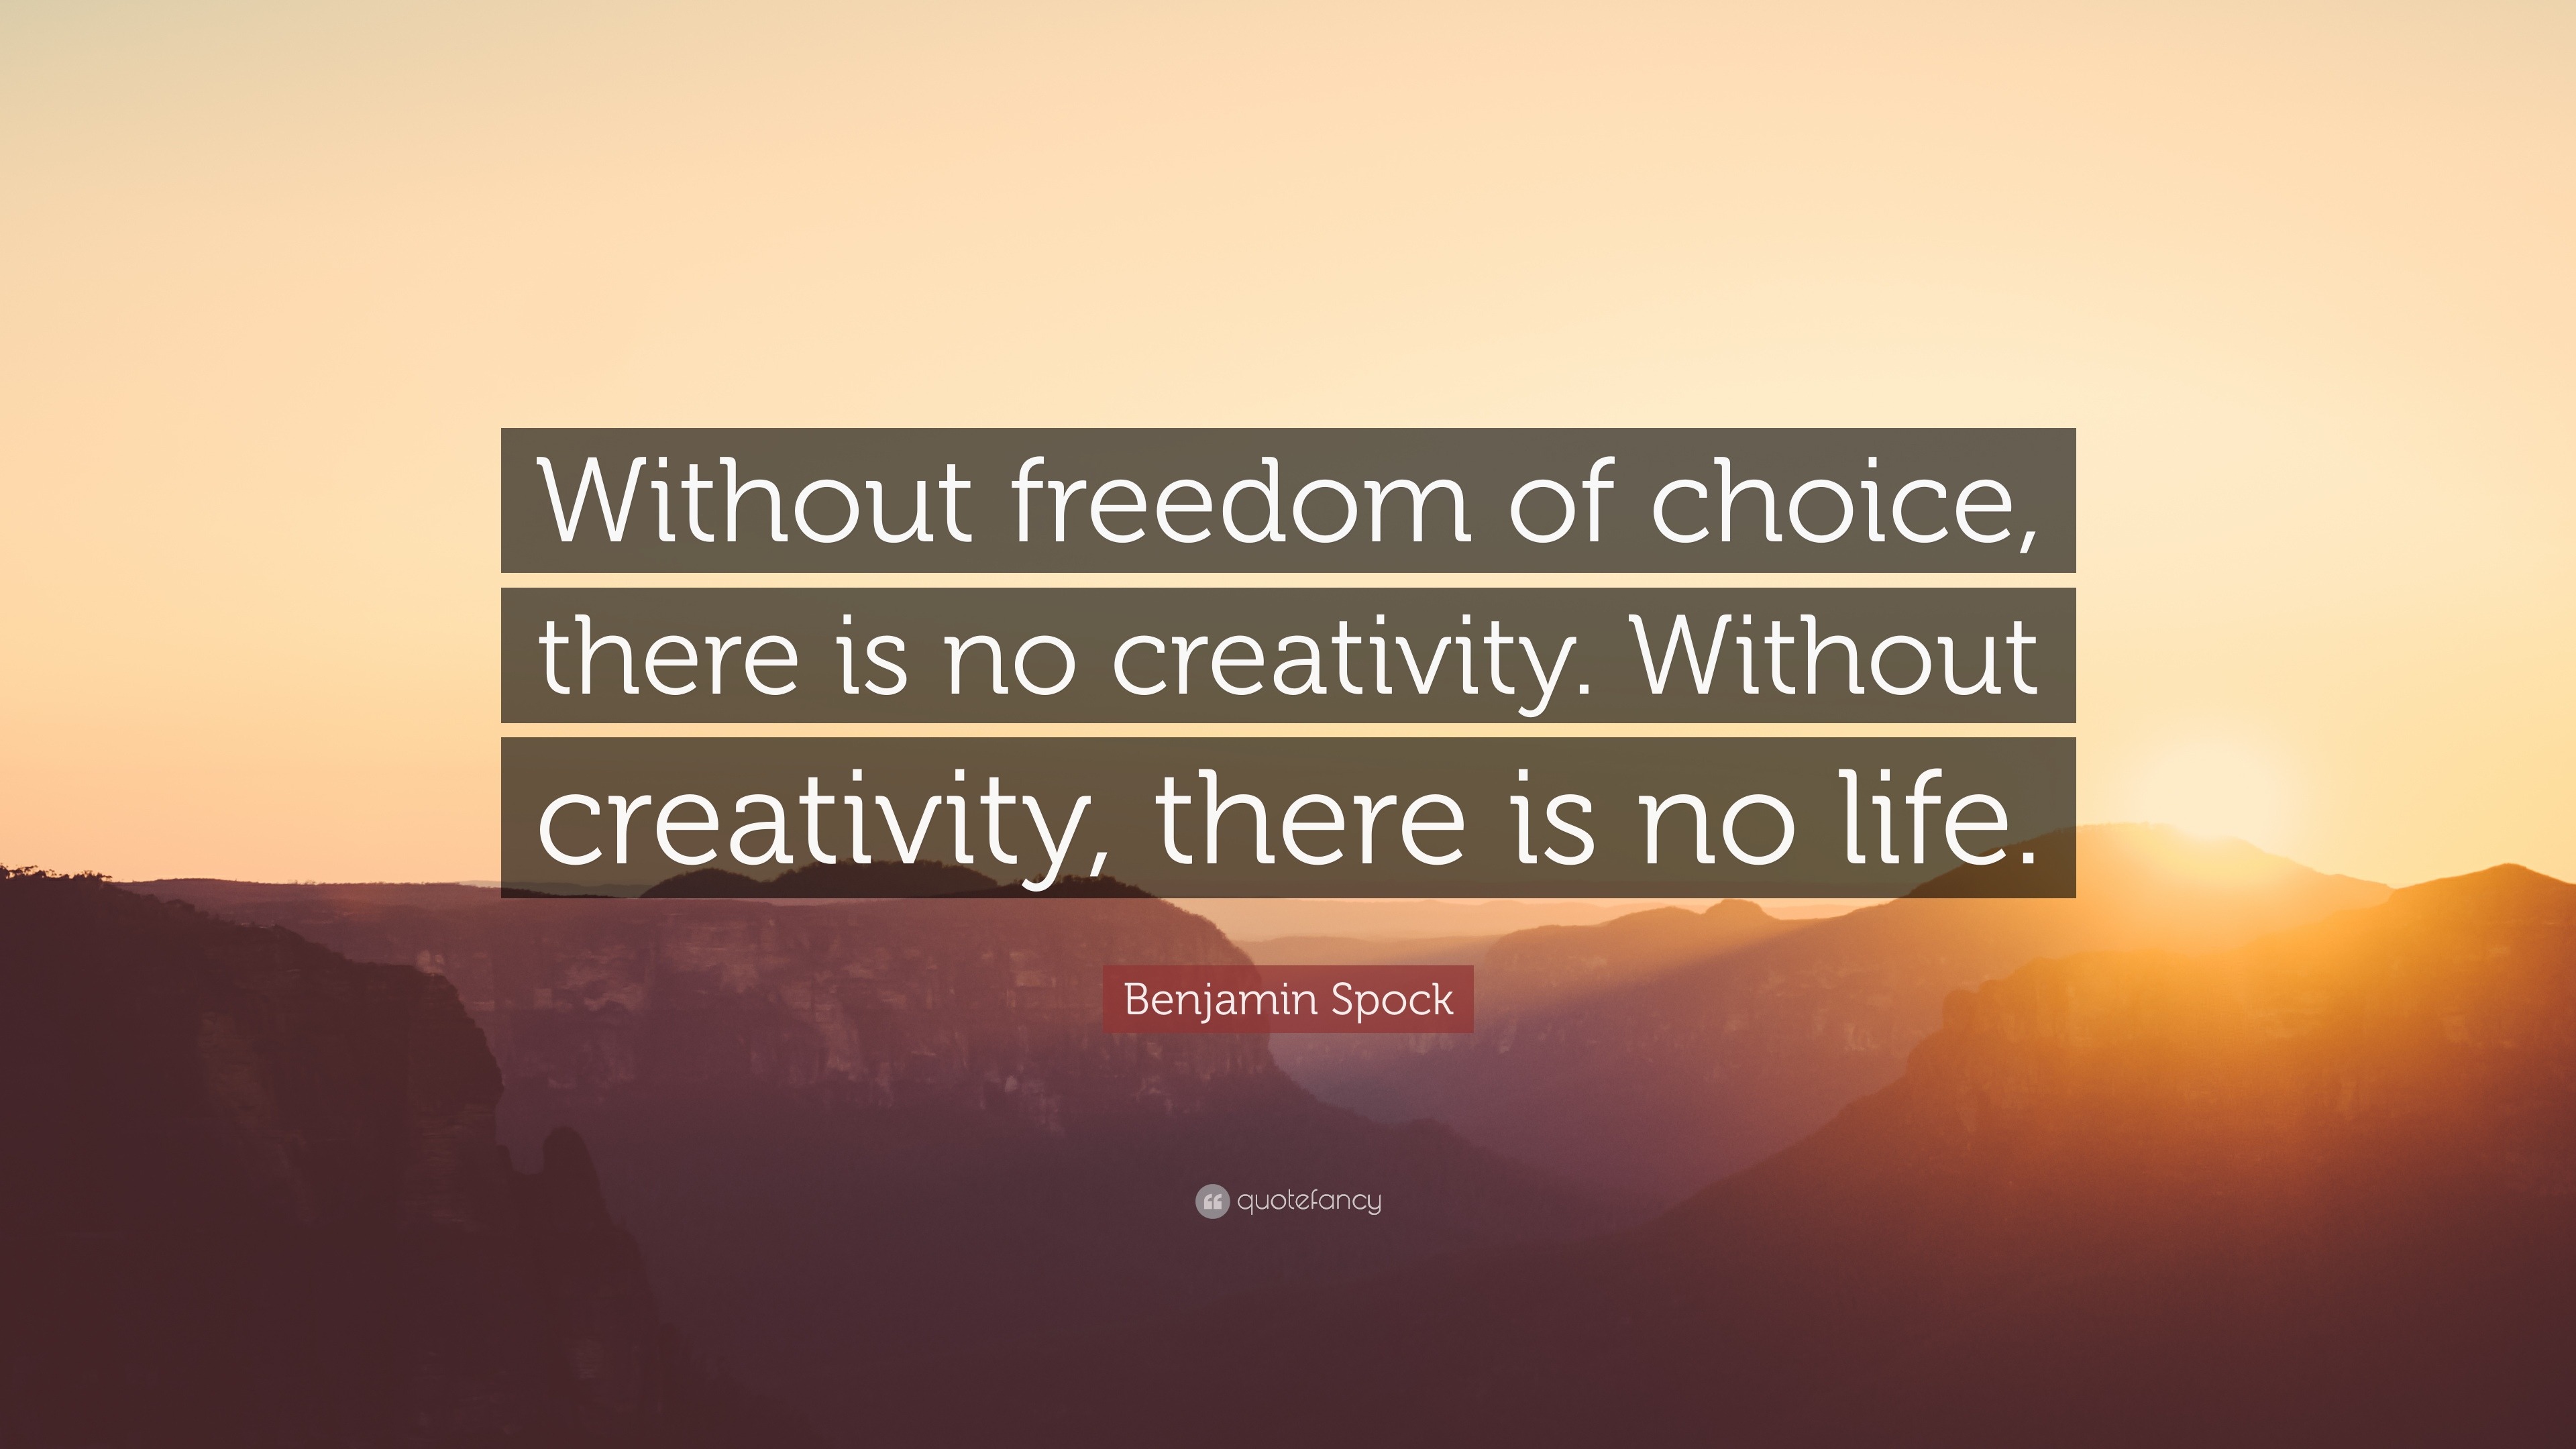 Benjamin Spock Quote “Without freedom of choice there is no creativity Without